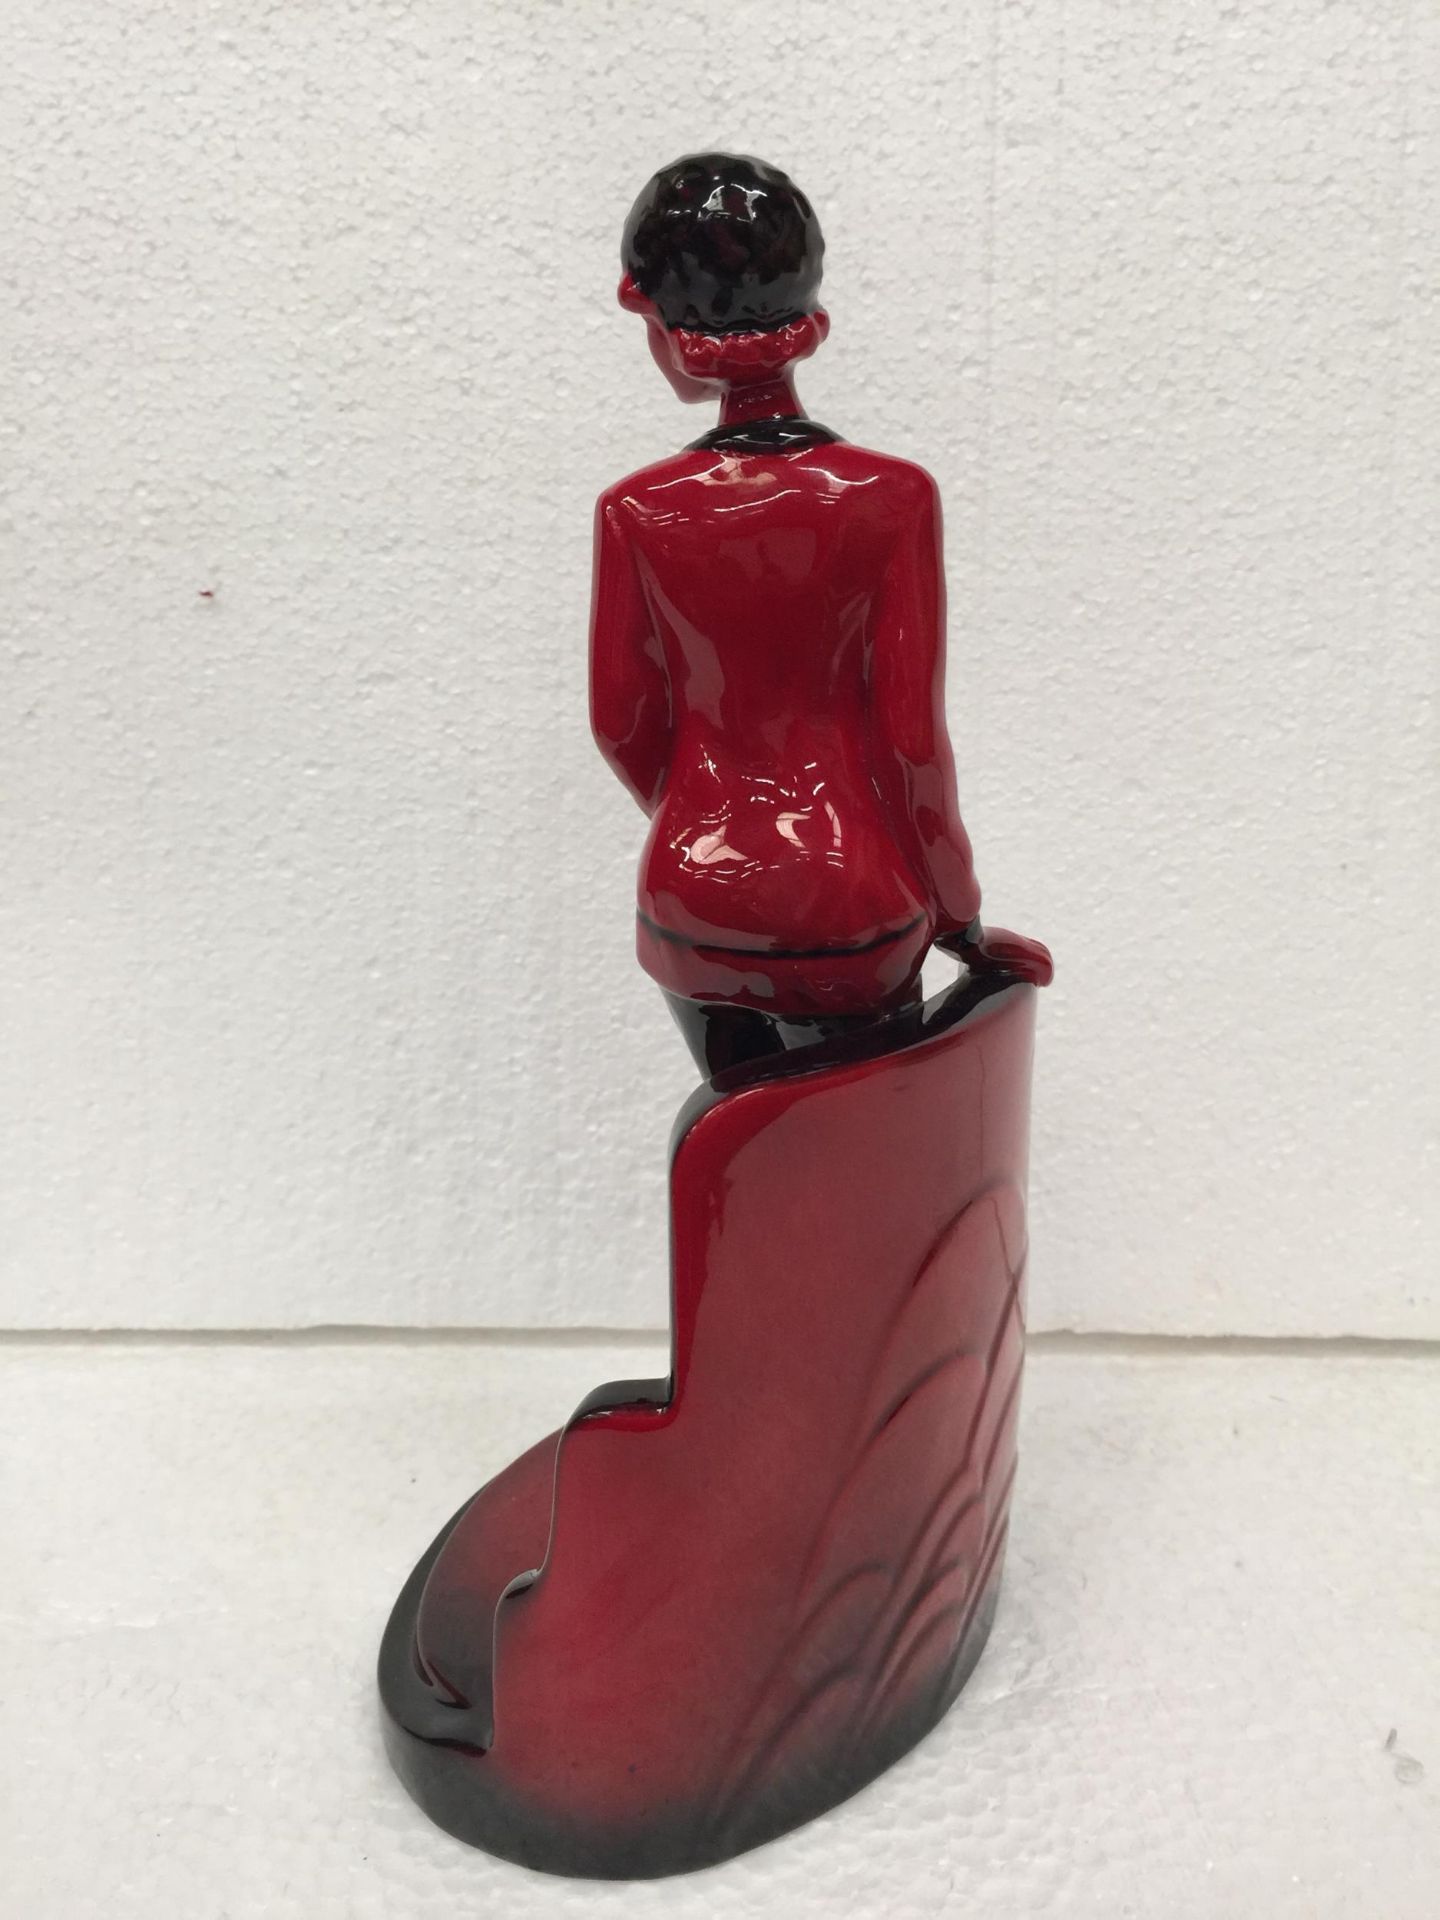 A PEGGY DAVIES RUBY FUSION ART DECO FIGURINE - 26 CM IN HEIGHT - Image 5 of 7